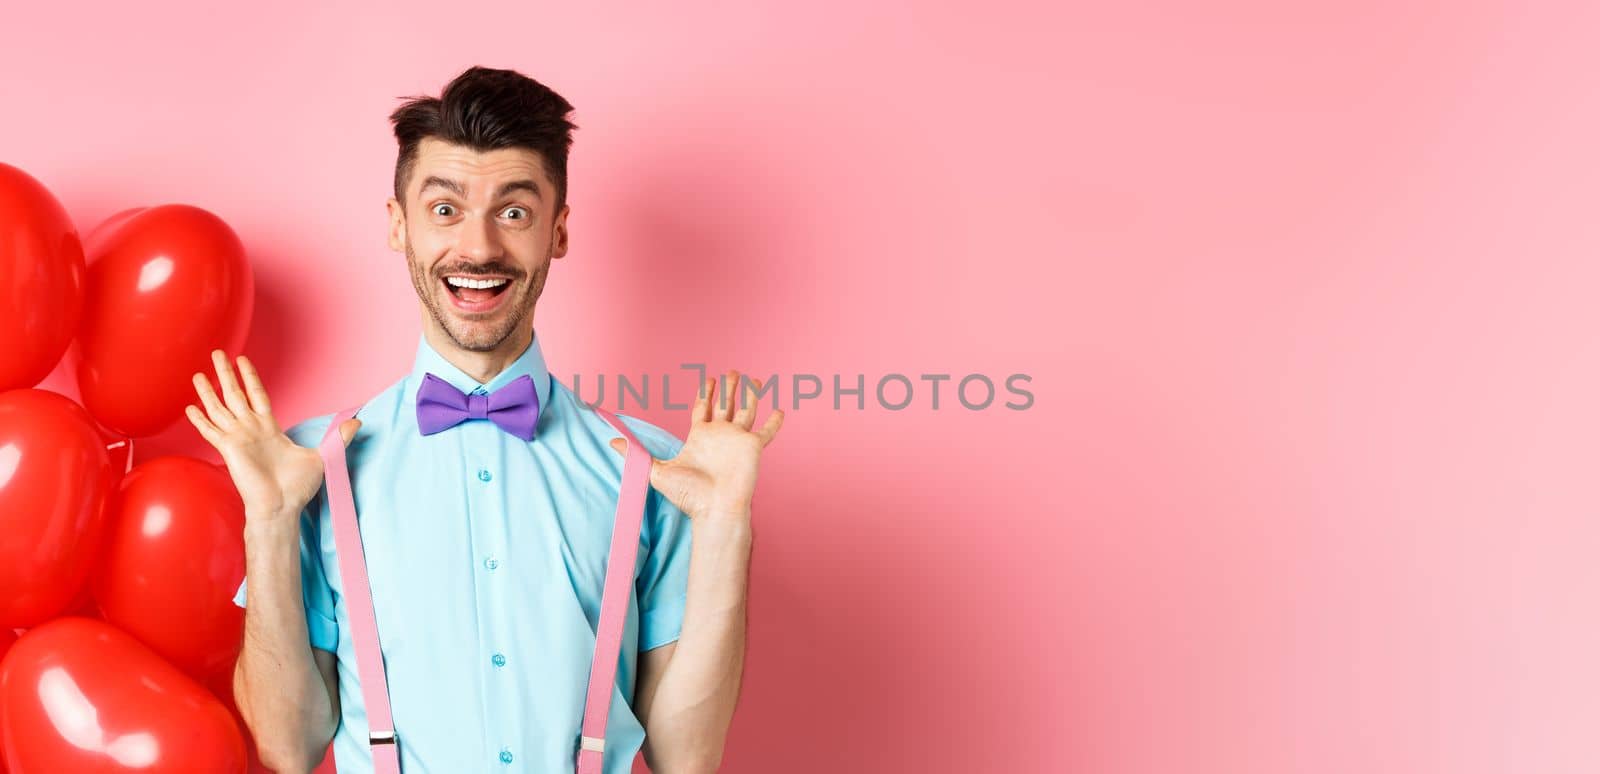 Valentines day concept. Happy young man looking surprised, raising hands up joyful, celebrating near big red hearts and pink background by Benzoix